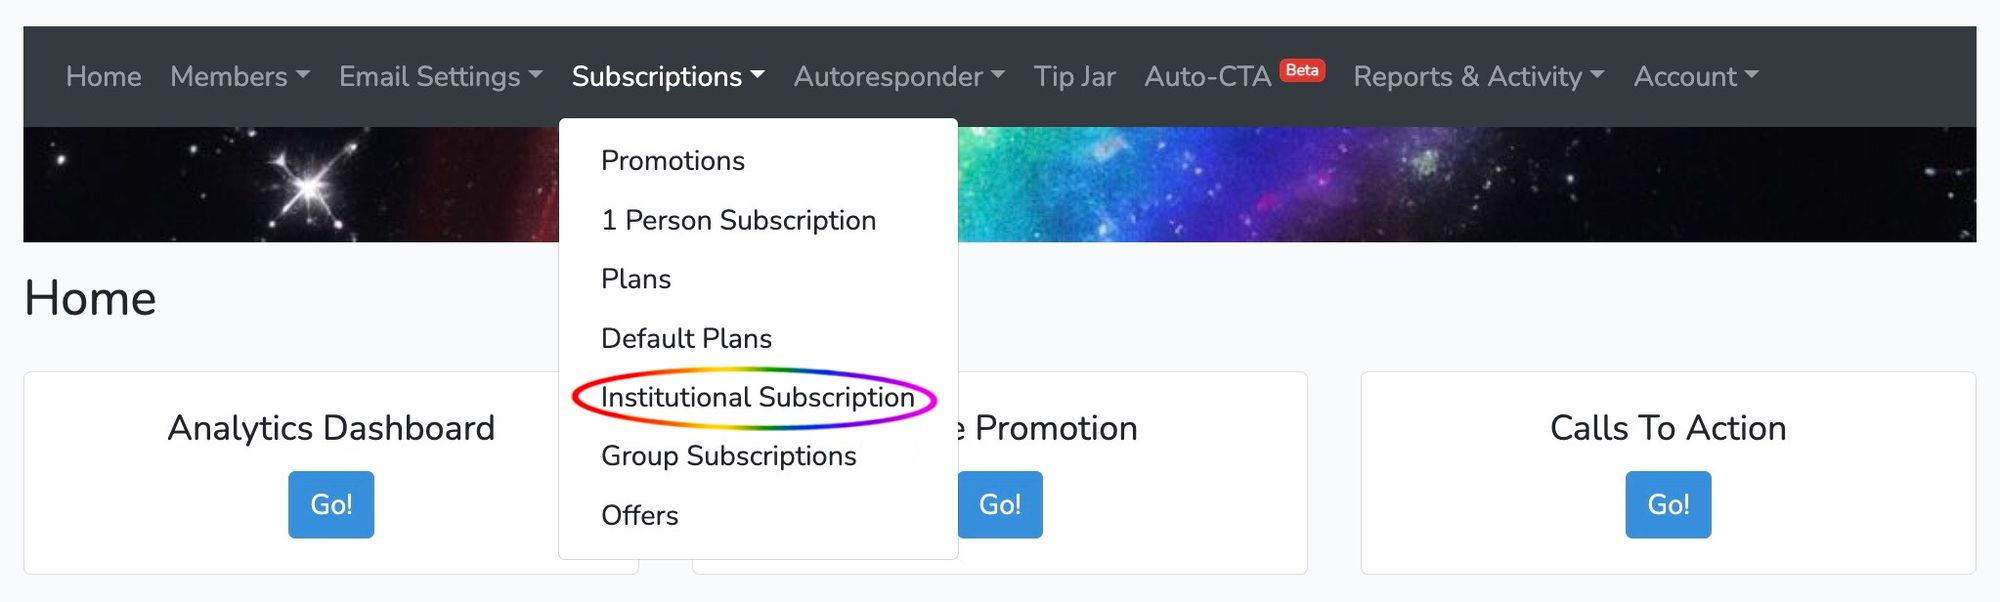 Institutional Subscription circled in menu